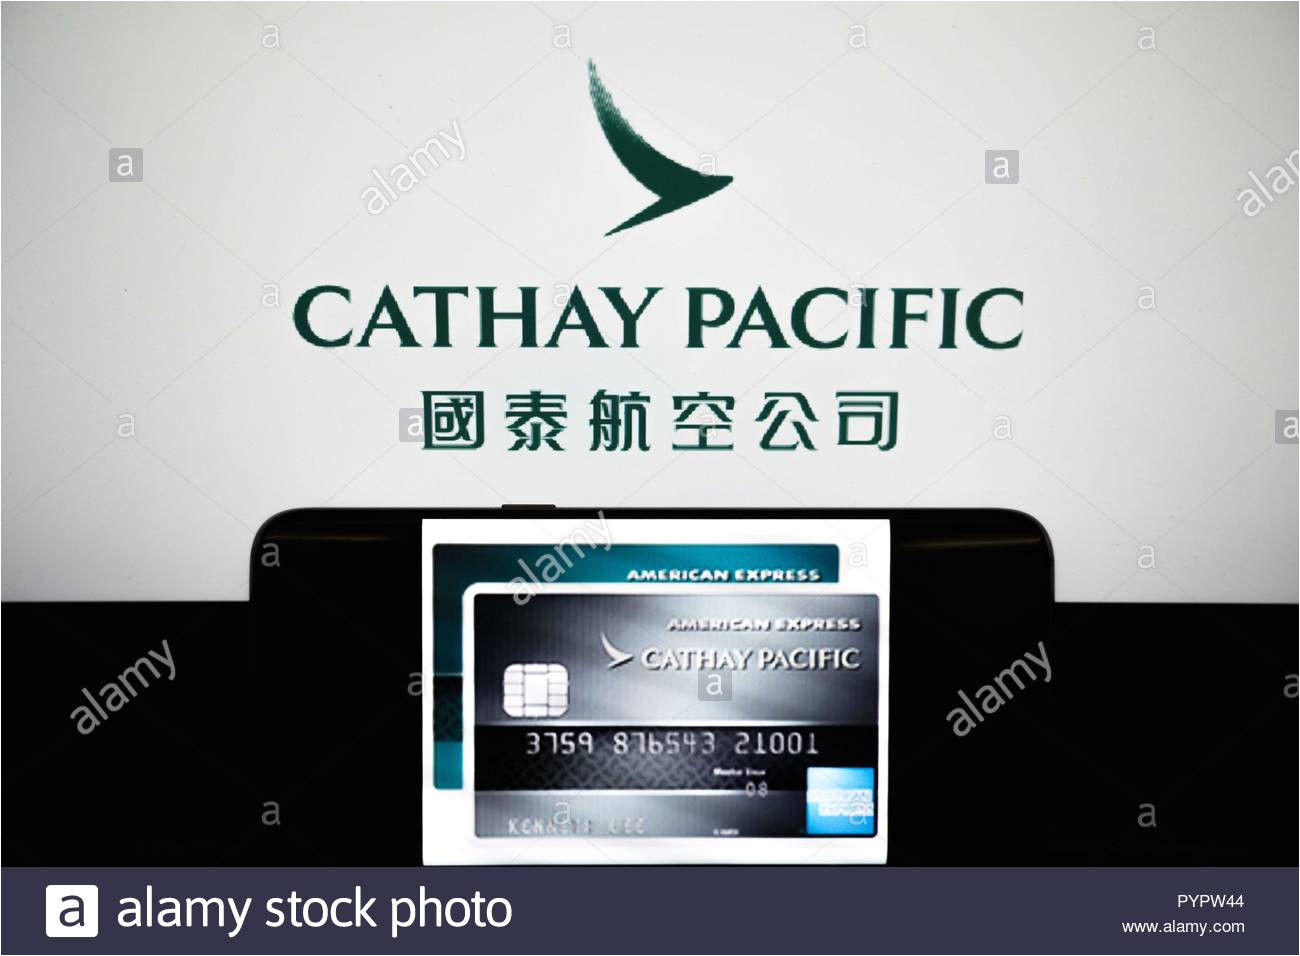 cathay pacific credit card displayed on a smartphone in front of a background of the cathay